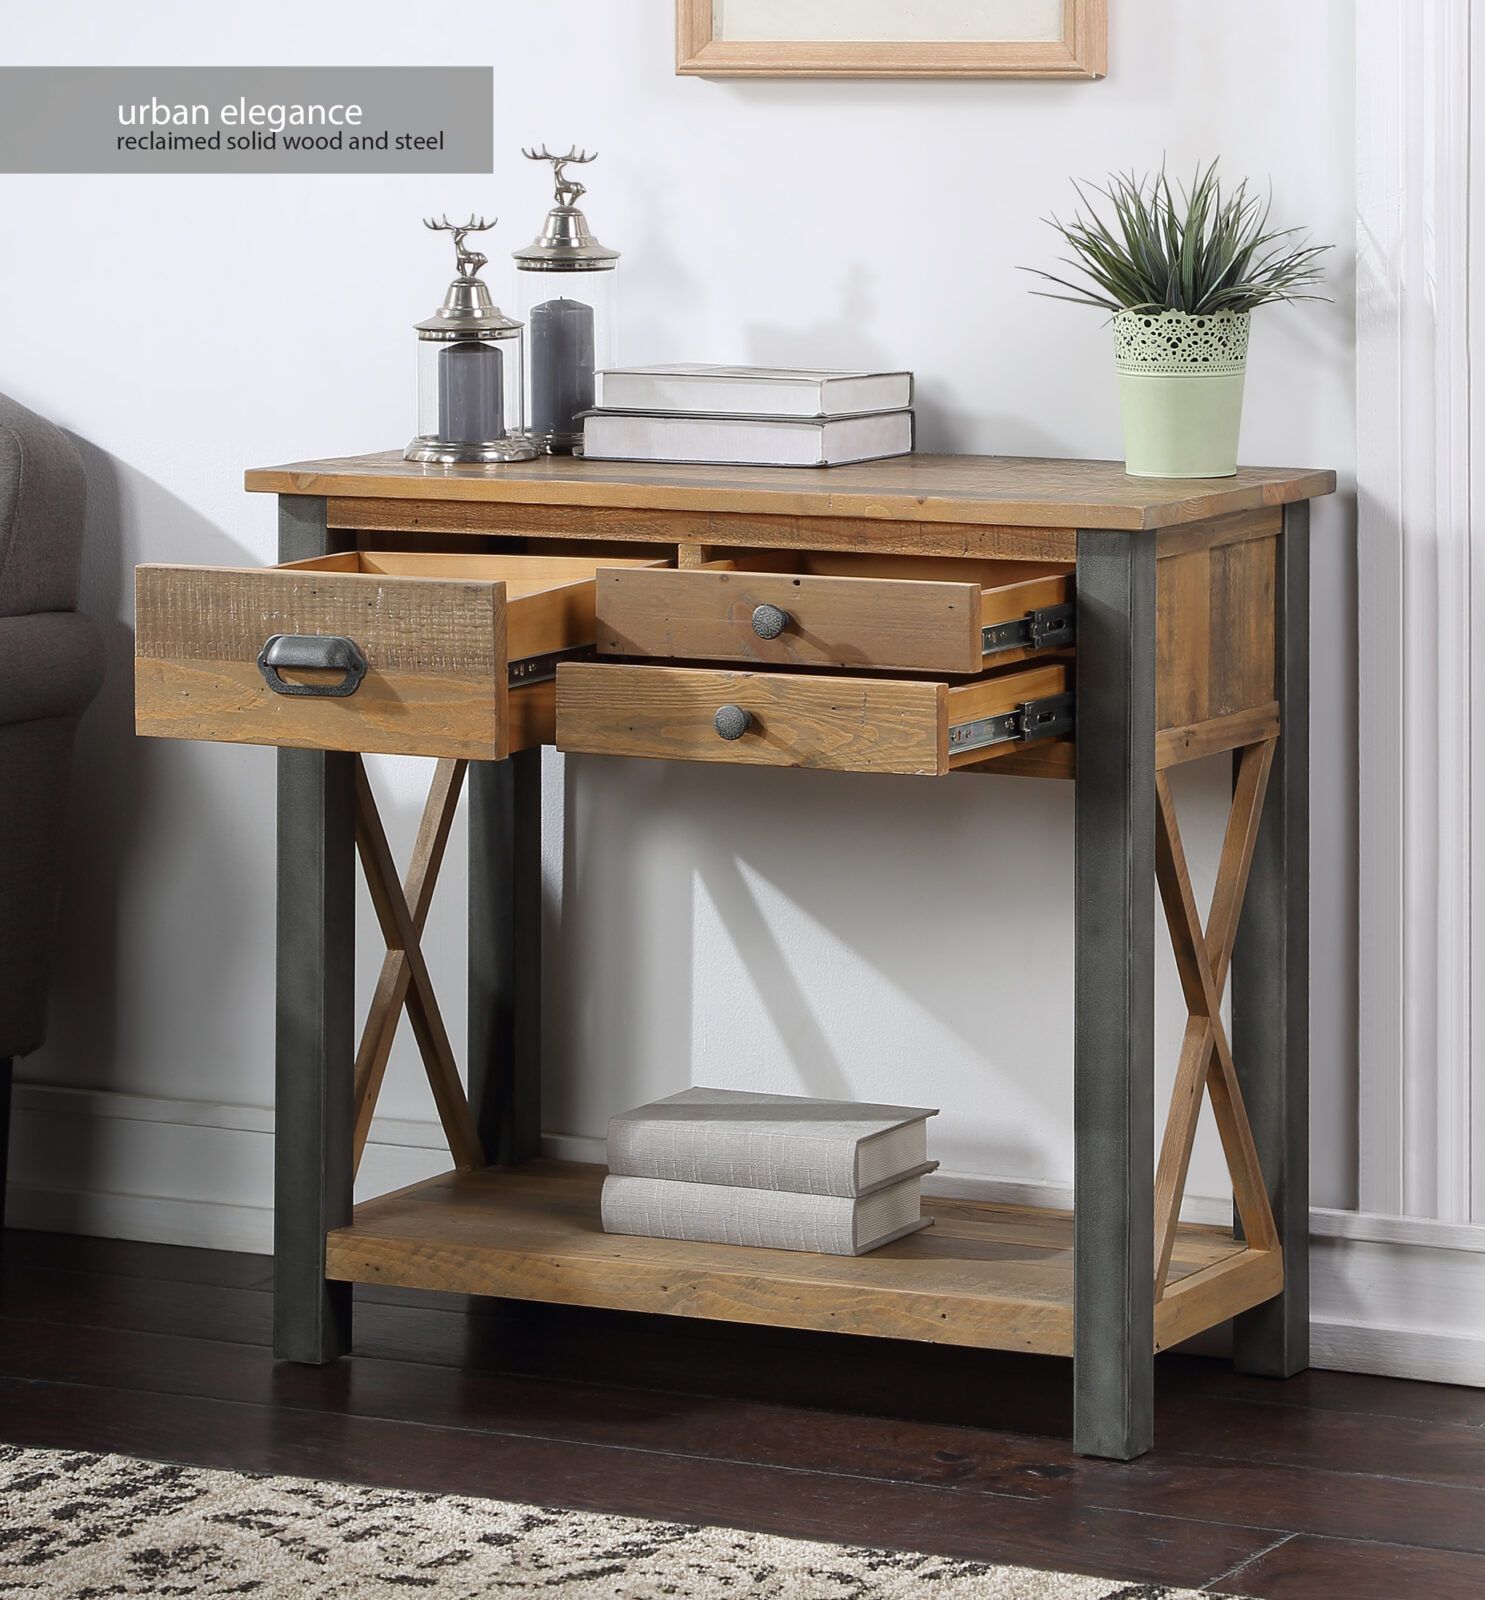 Urban Elegance – Reclaimed Small Console Table – Bargain Oak Throughout Reclaimed Wood Console Tables (View 3 of 20)